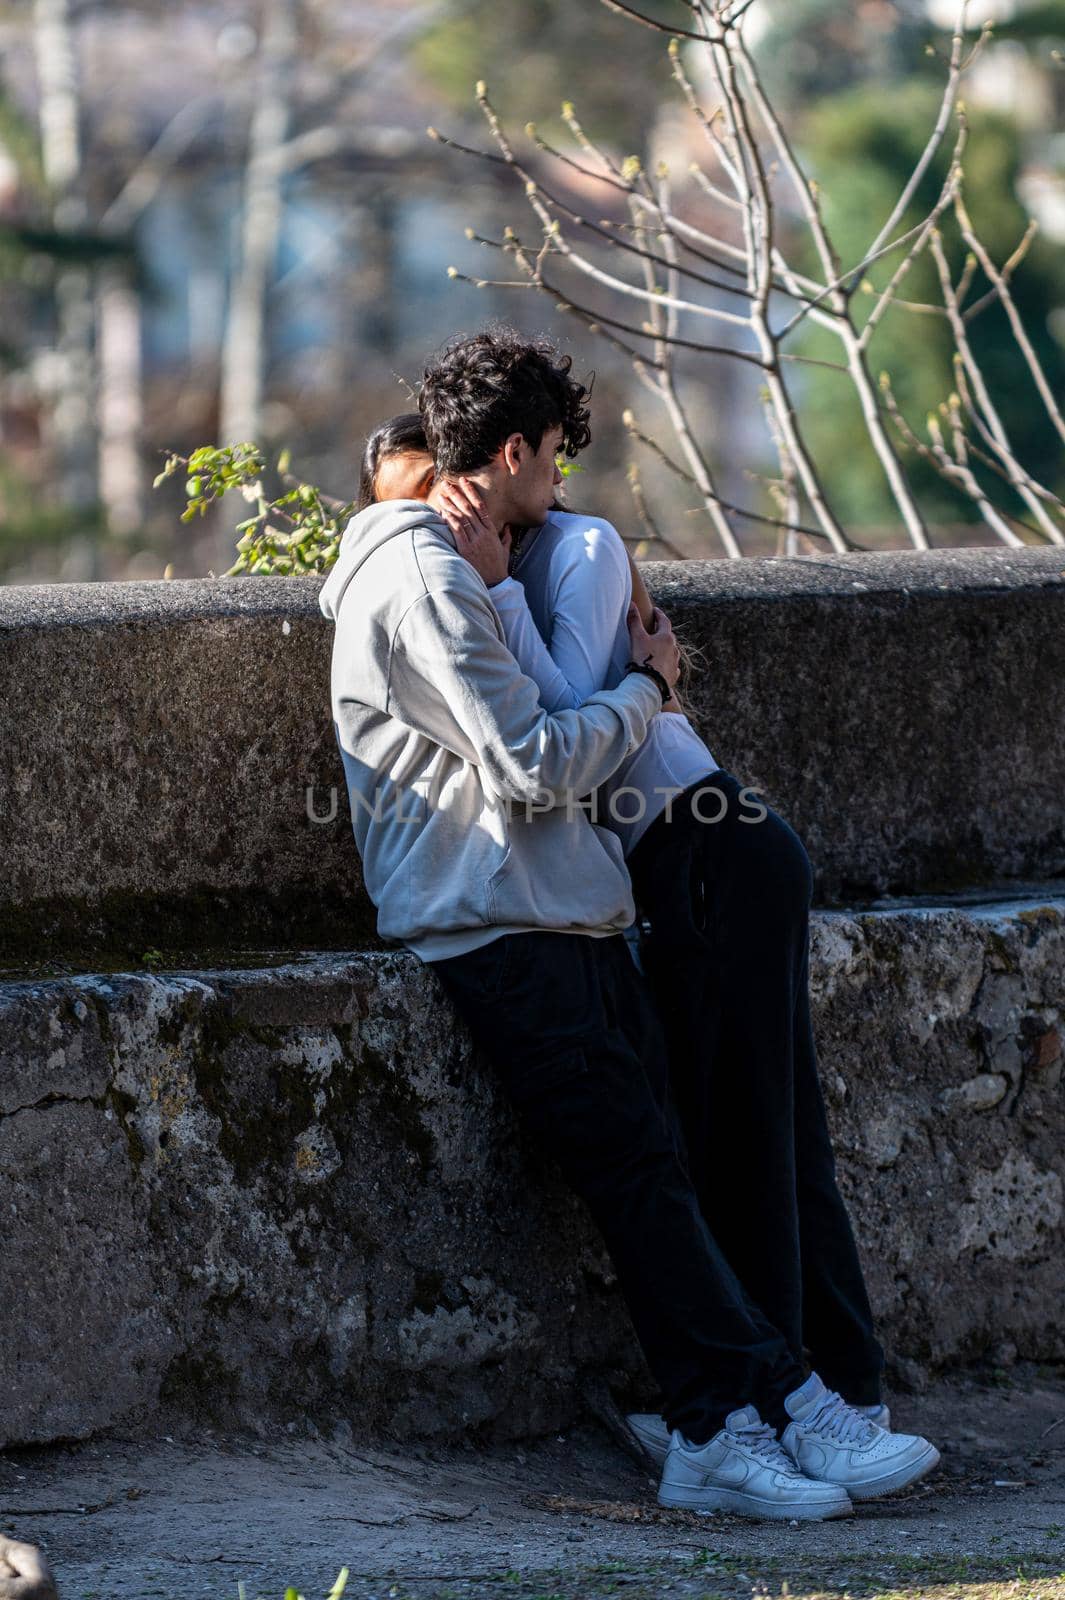 terni,italy march 25 2021:engaged couple hugging each other at the park